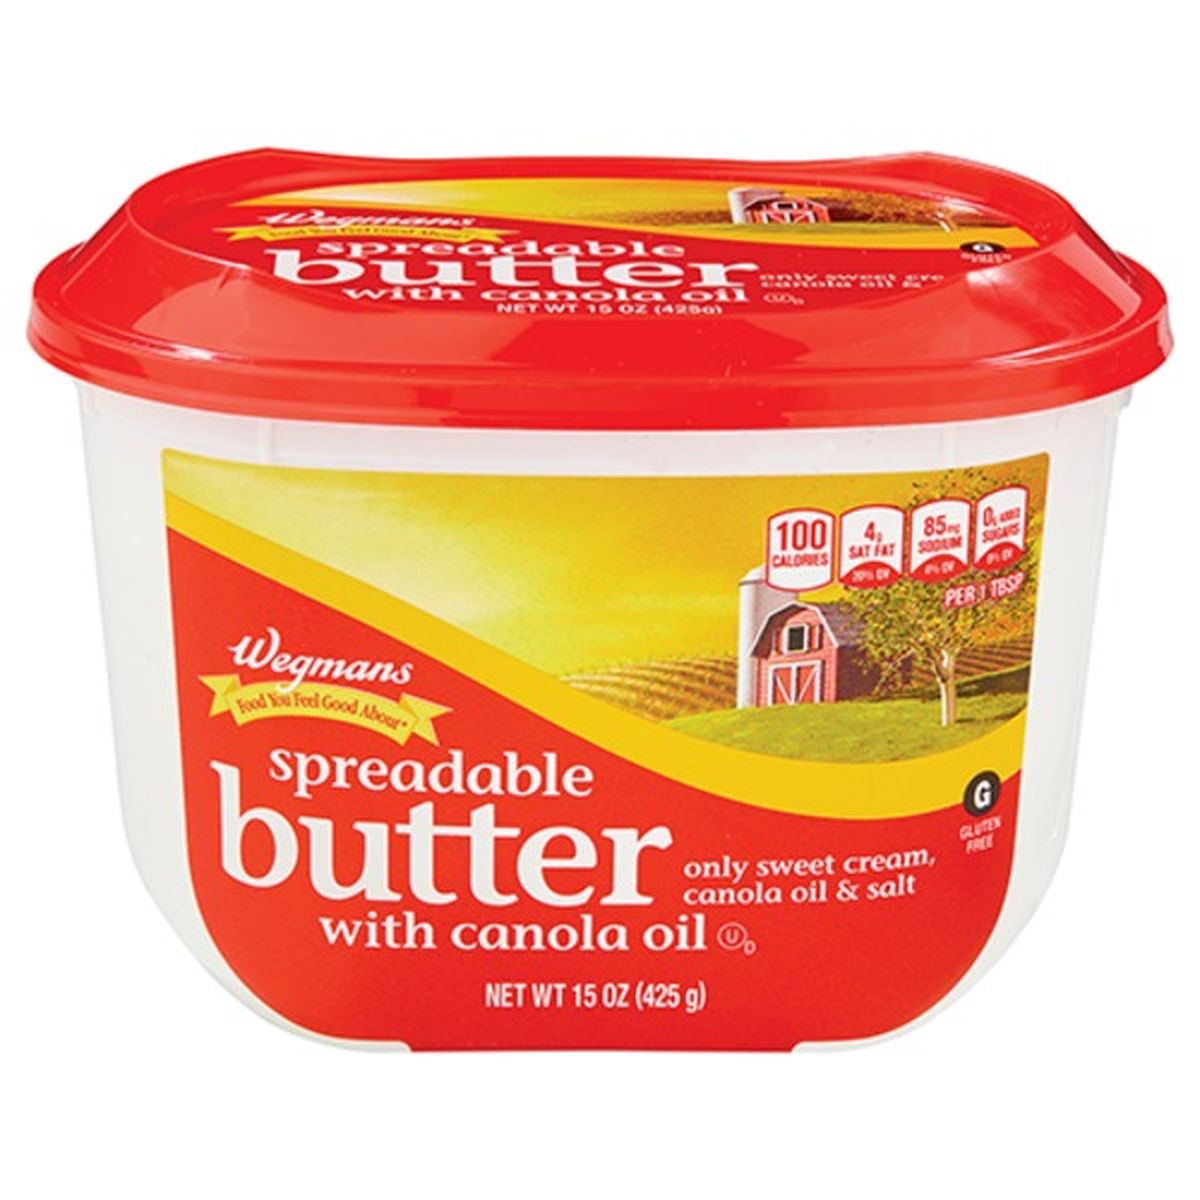 Calories in Wegmans Spreadable Butter with Canola Oil